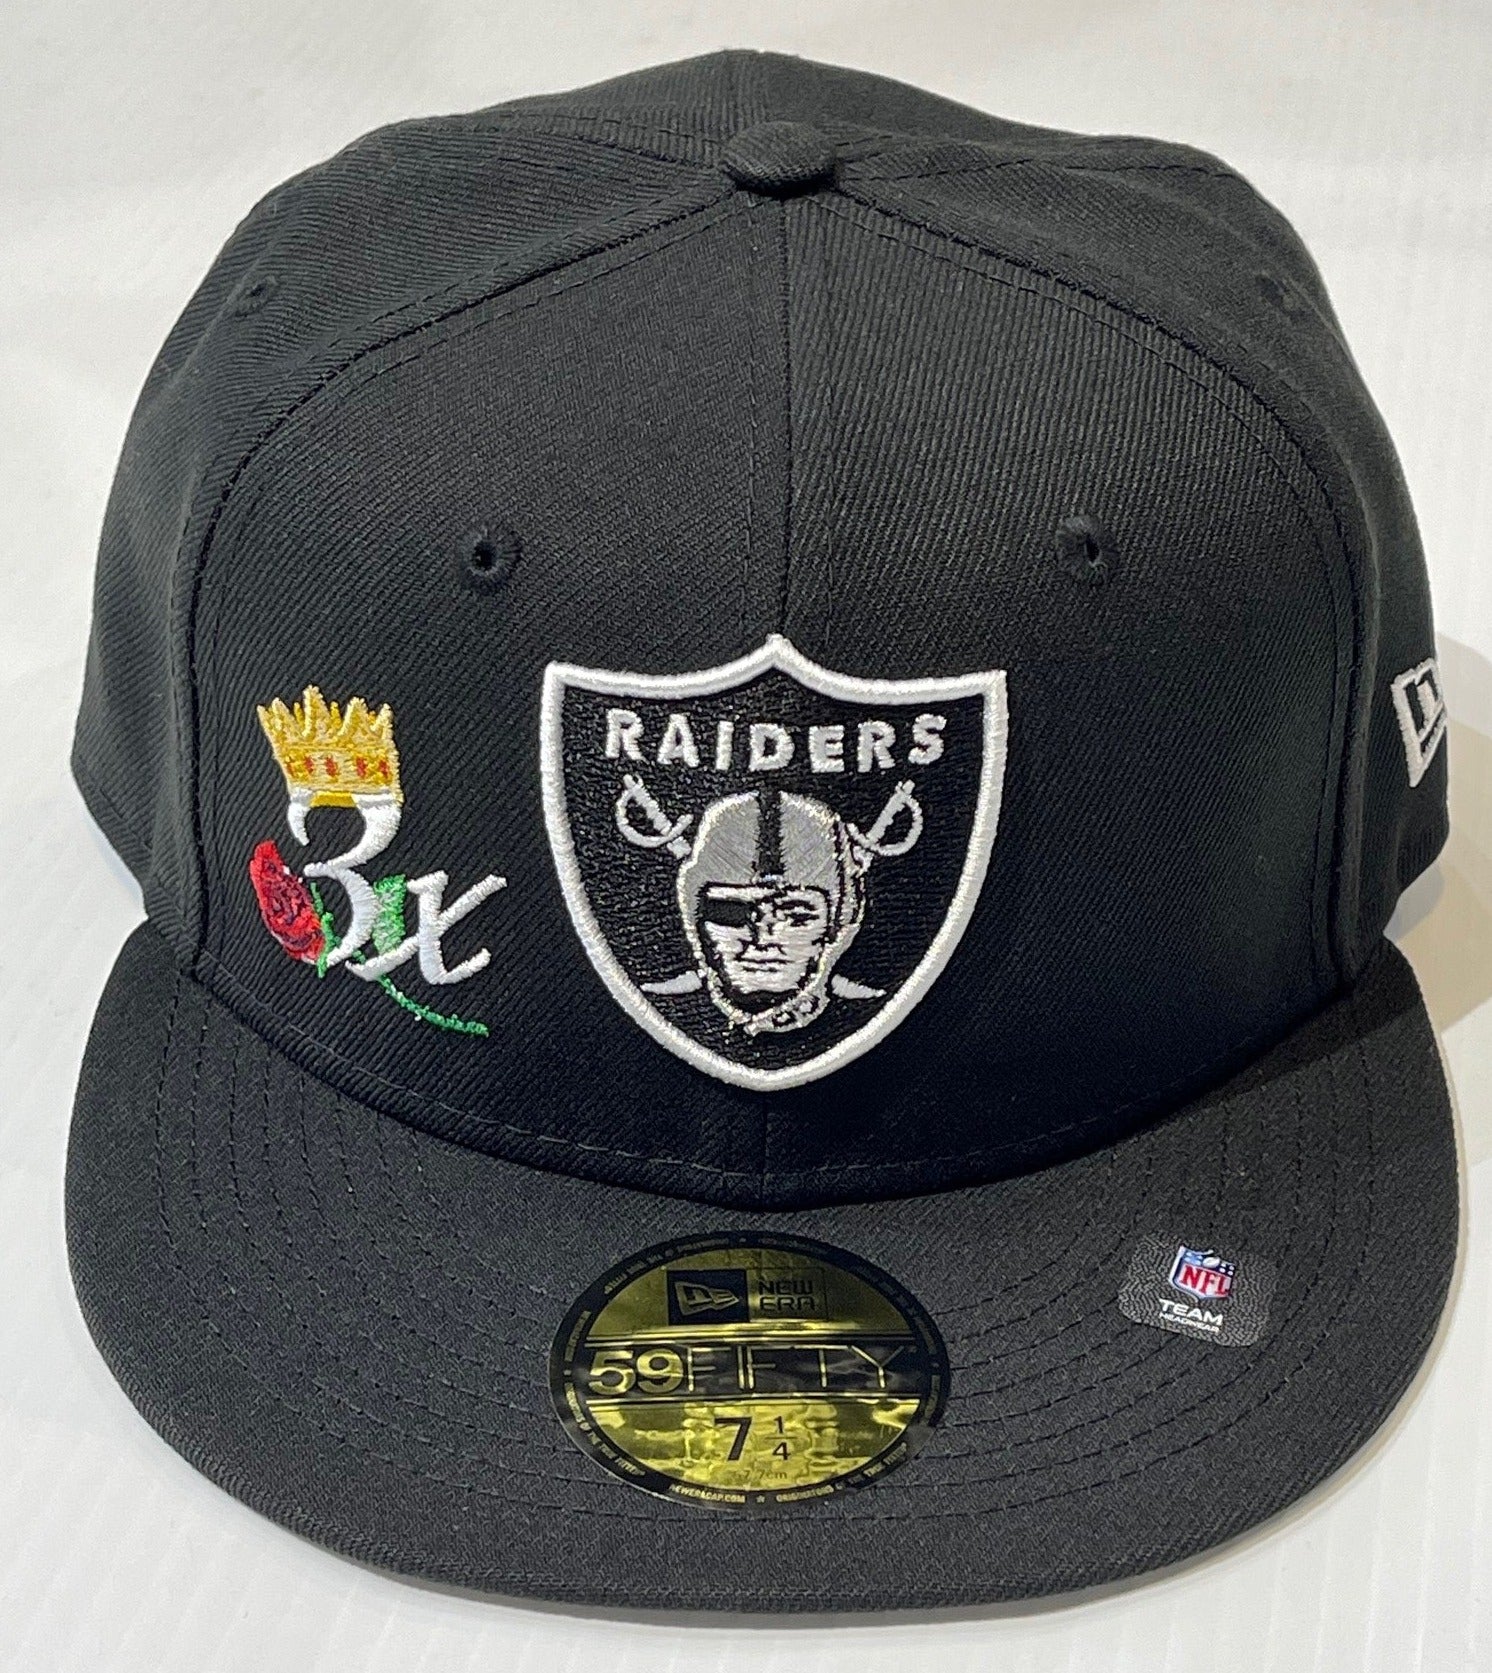 Las Vegas Raiders 3x Crown Champs New Era 59fifty Fitted Hat - Black